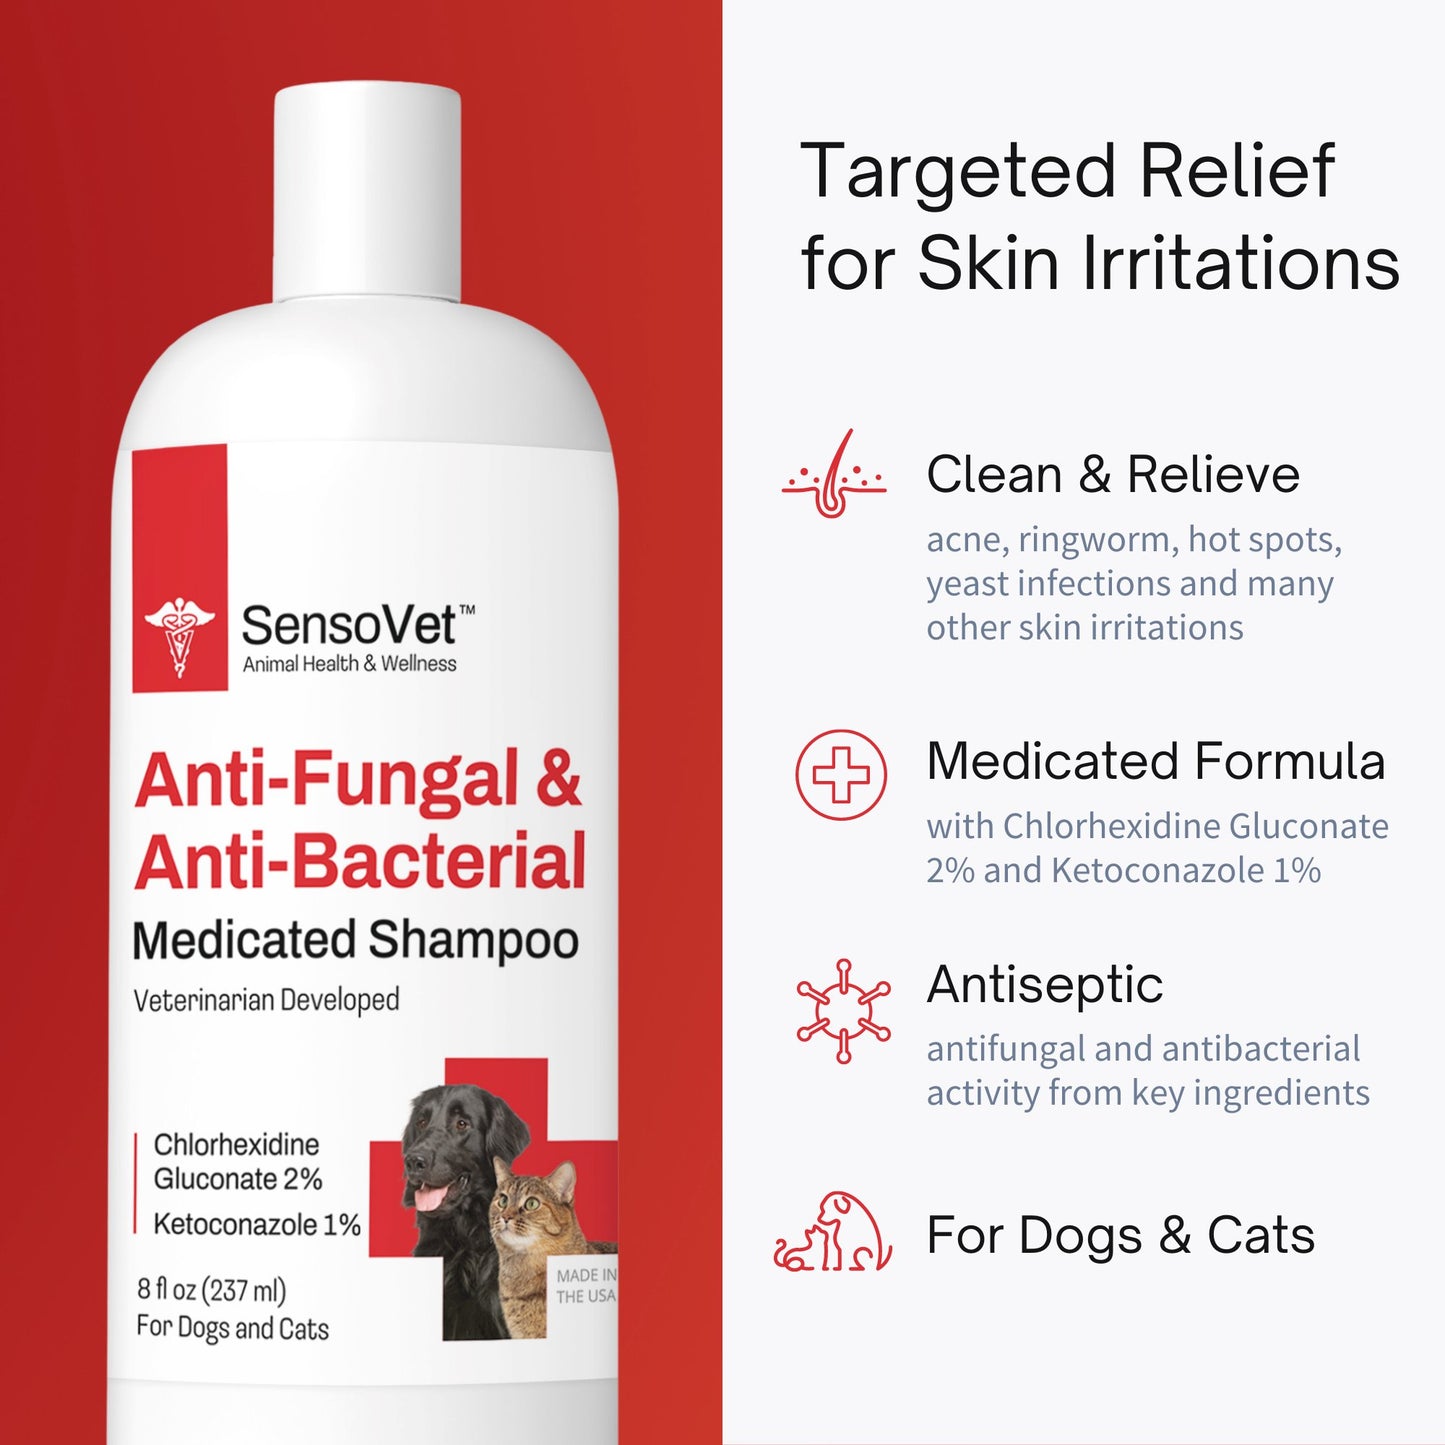 Anti-Fungal & Anti-Bacterial Shampoo for Dogs & Cats - 8oz